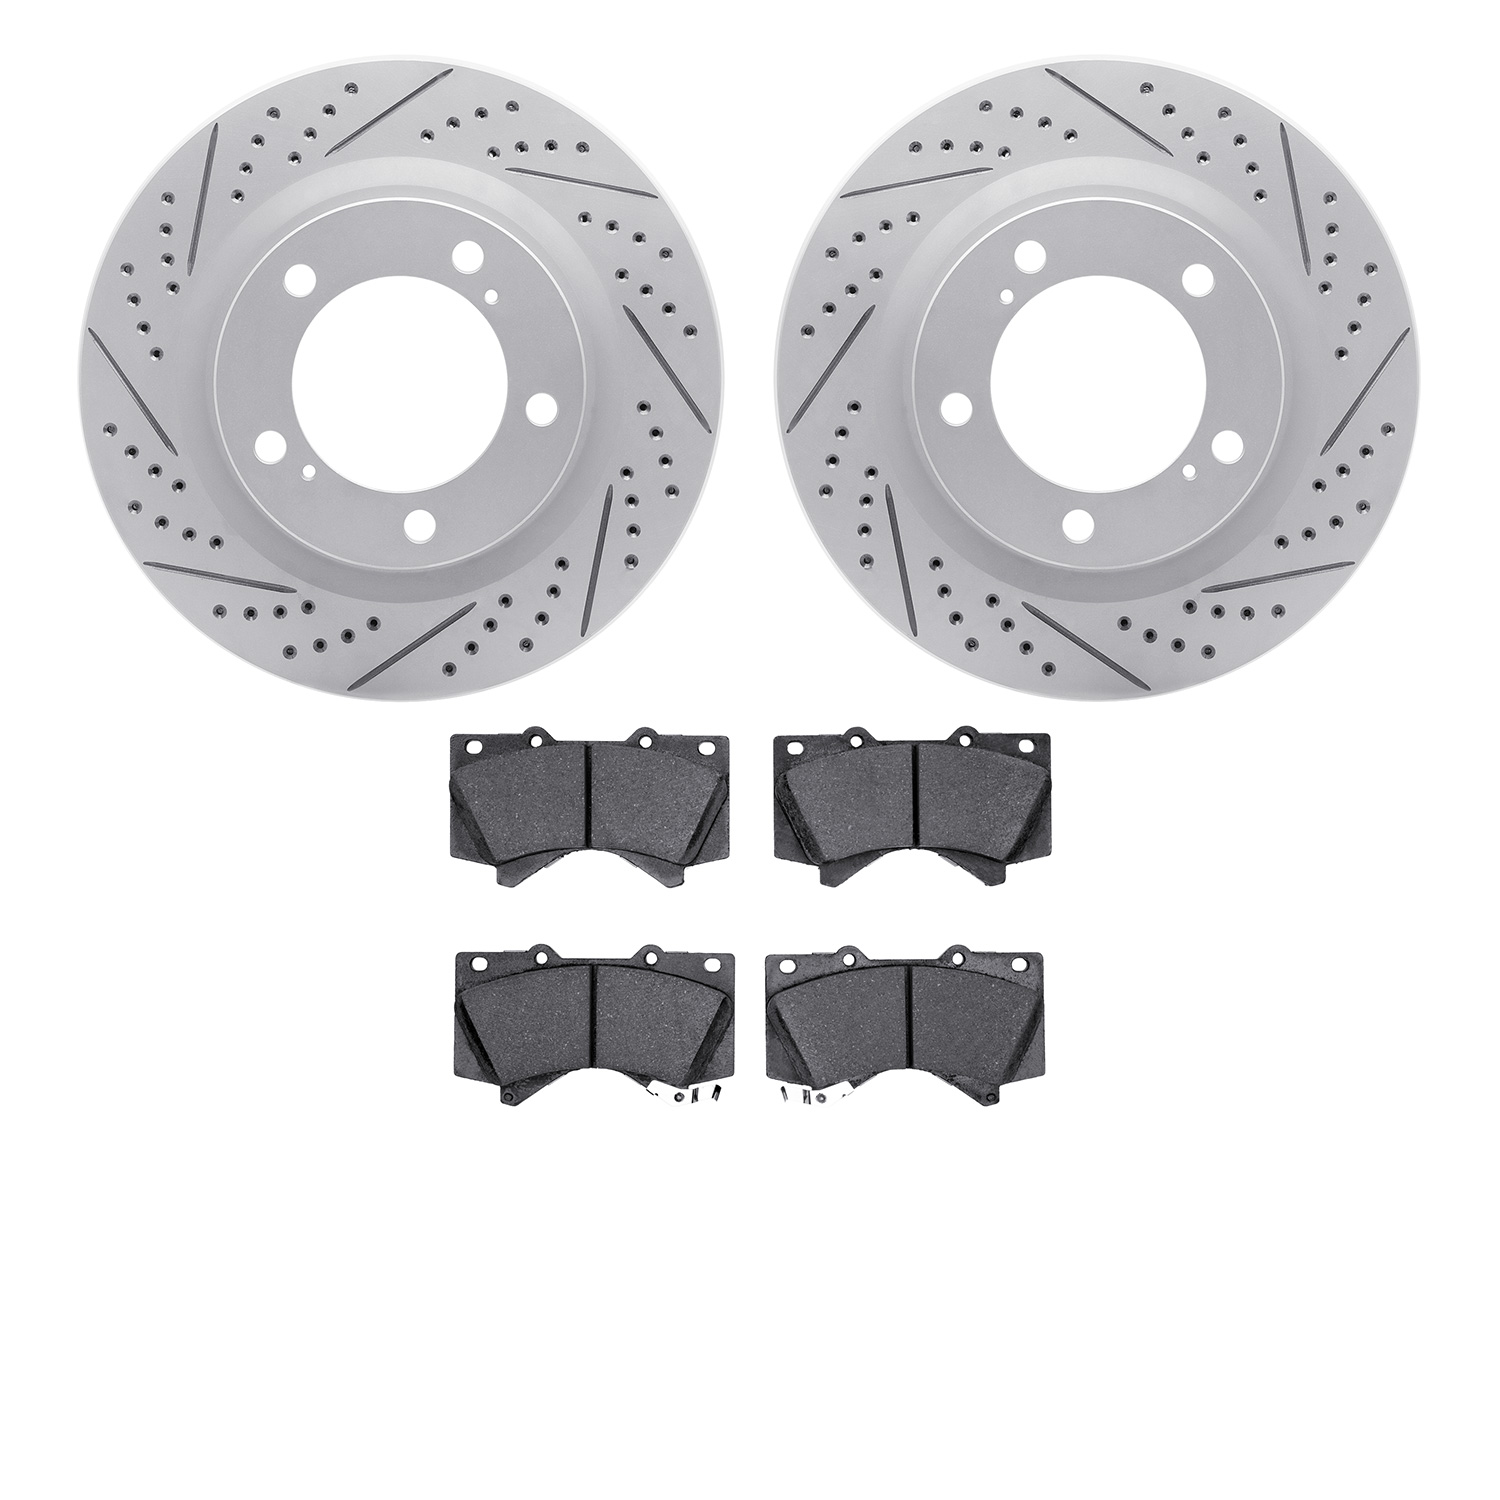 2502-76161 Geoperformance Drilled/Slotted Rotors w/5000 Advanced Brake Pads Kit, Fits Select Lexus/Toyota/Scion, Position: Front